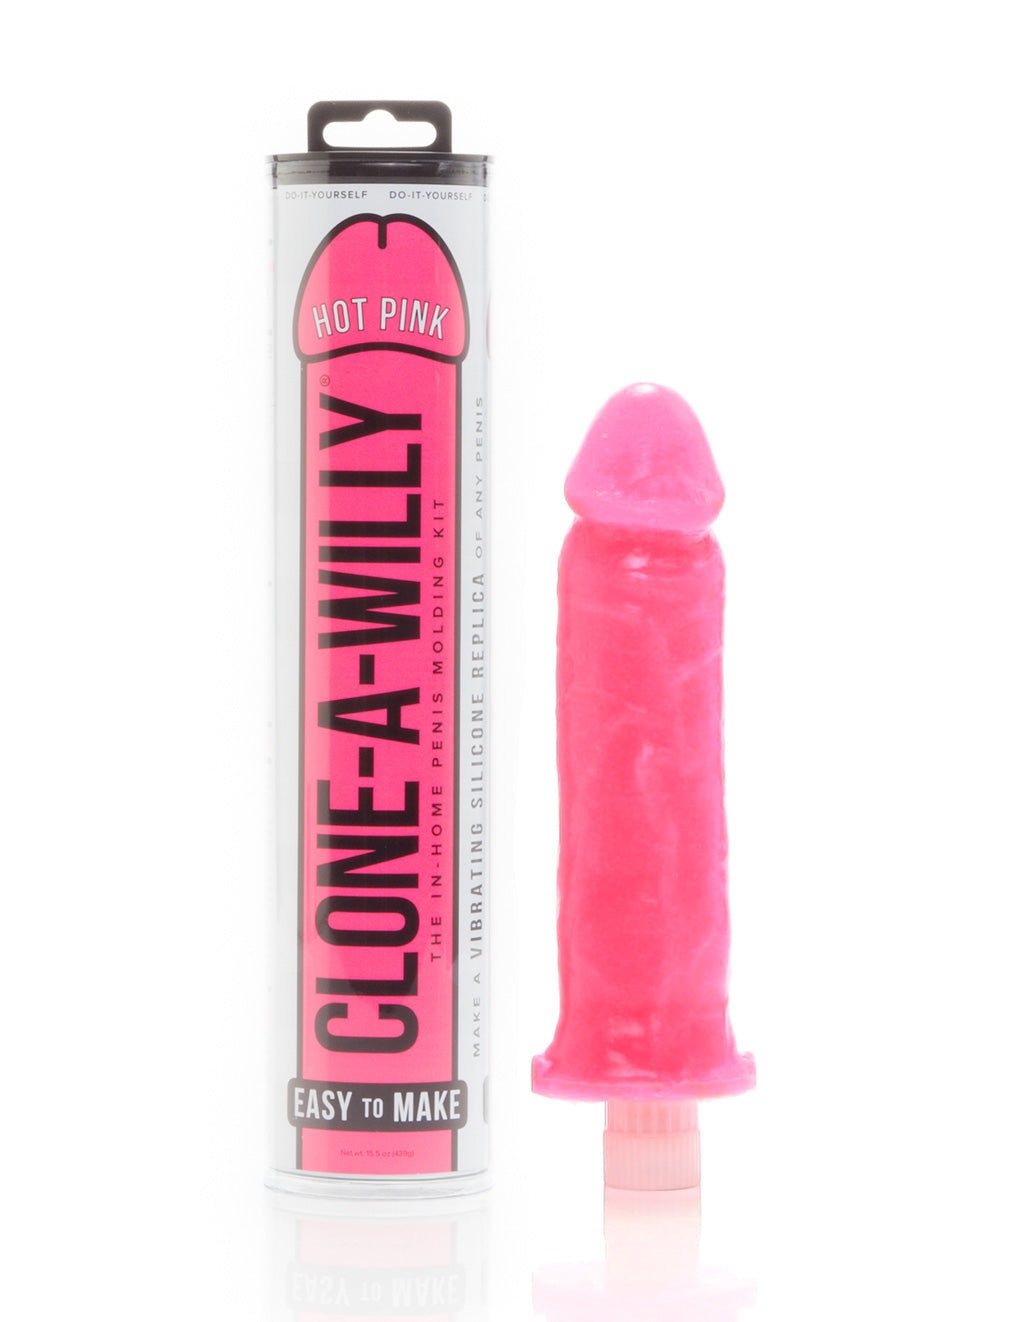 Clone A Willy Dildo Molding Kit Hotpink With A Mold